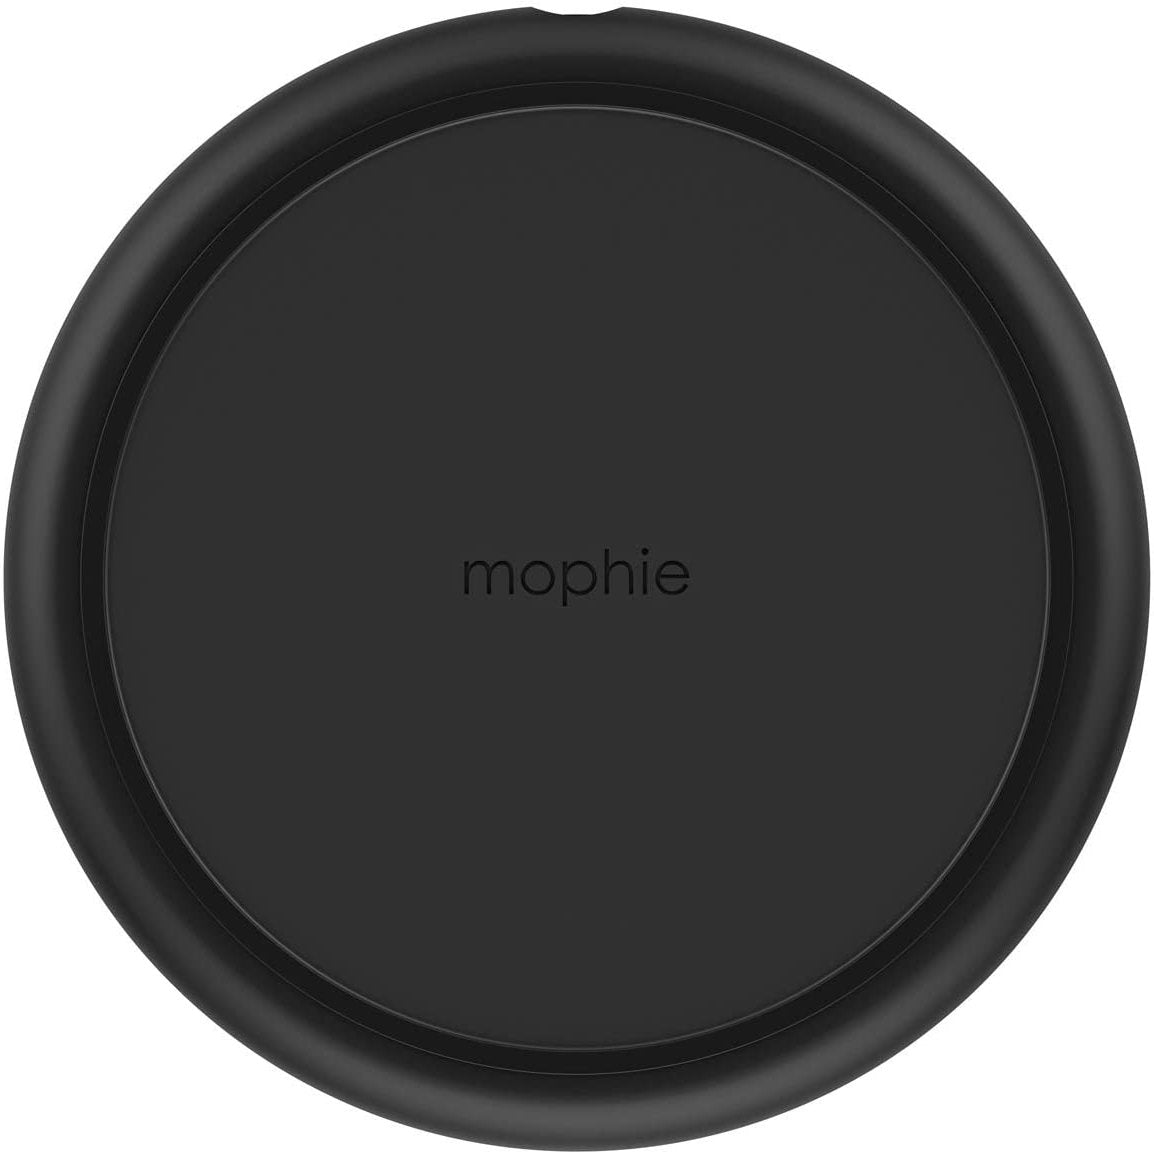 Mophie Fast Charging Wireless Charging Pad With Plug for iPhone & Airpods Black